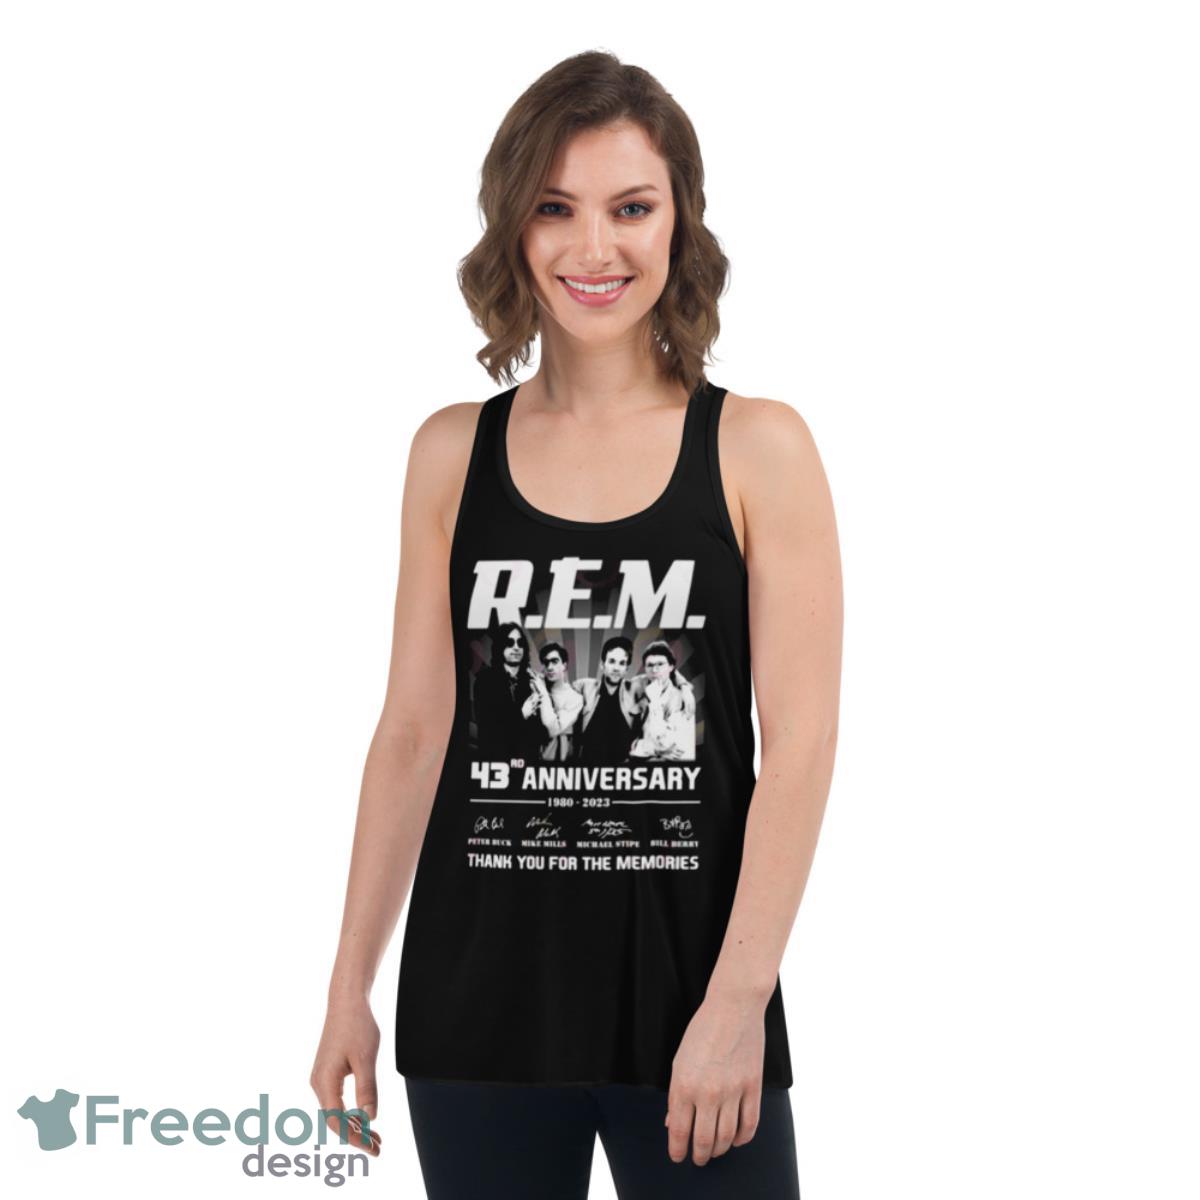 R.E.M. 1 BK 43rd Anniversary 1980 – 2023 Thank You For The Memories Signatures Shirt